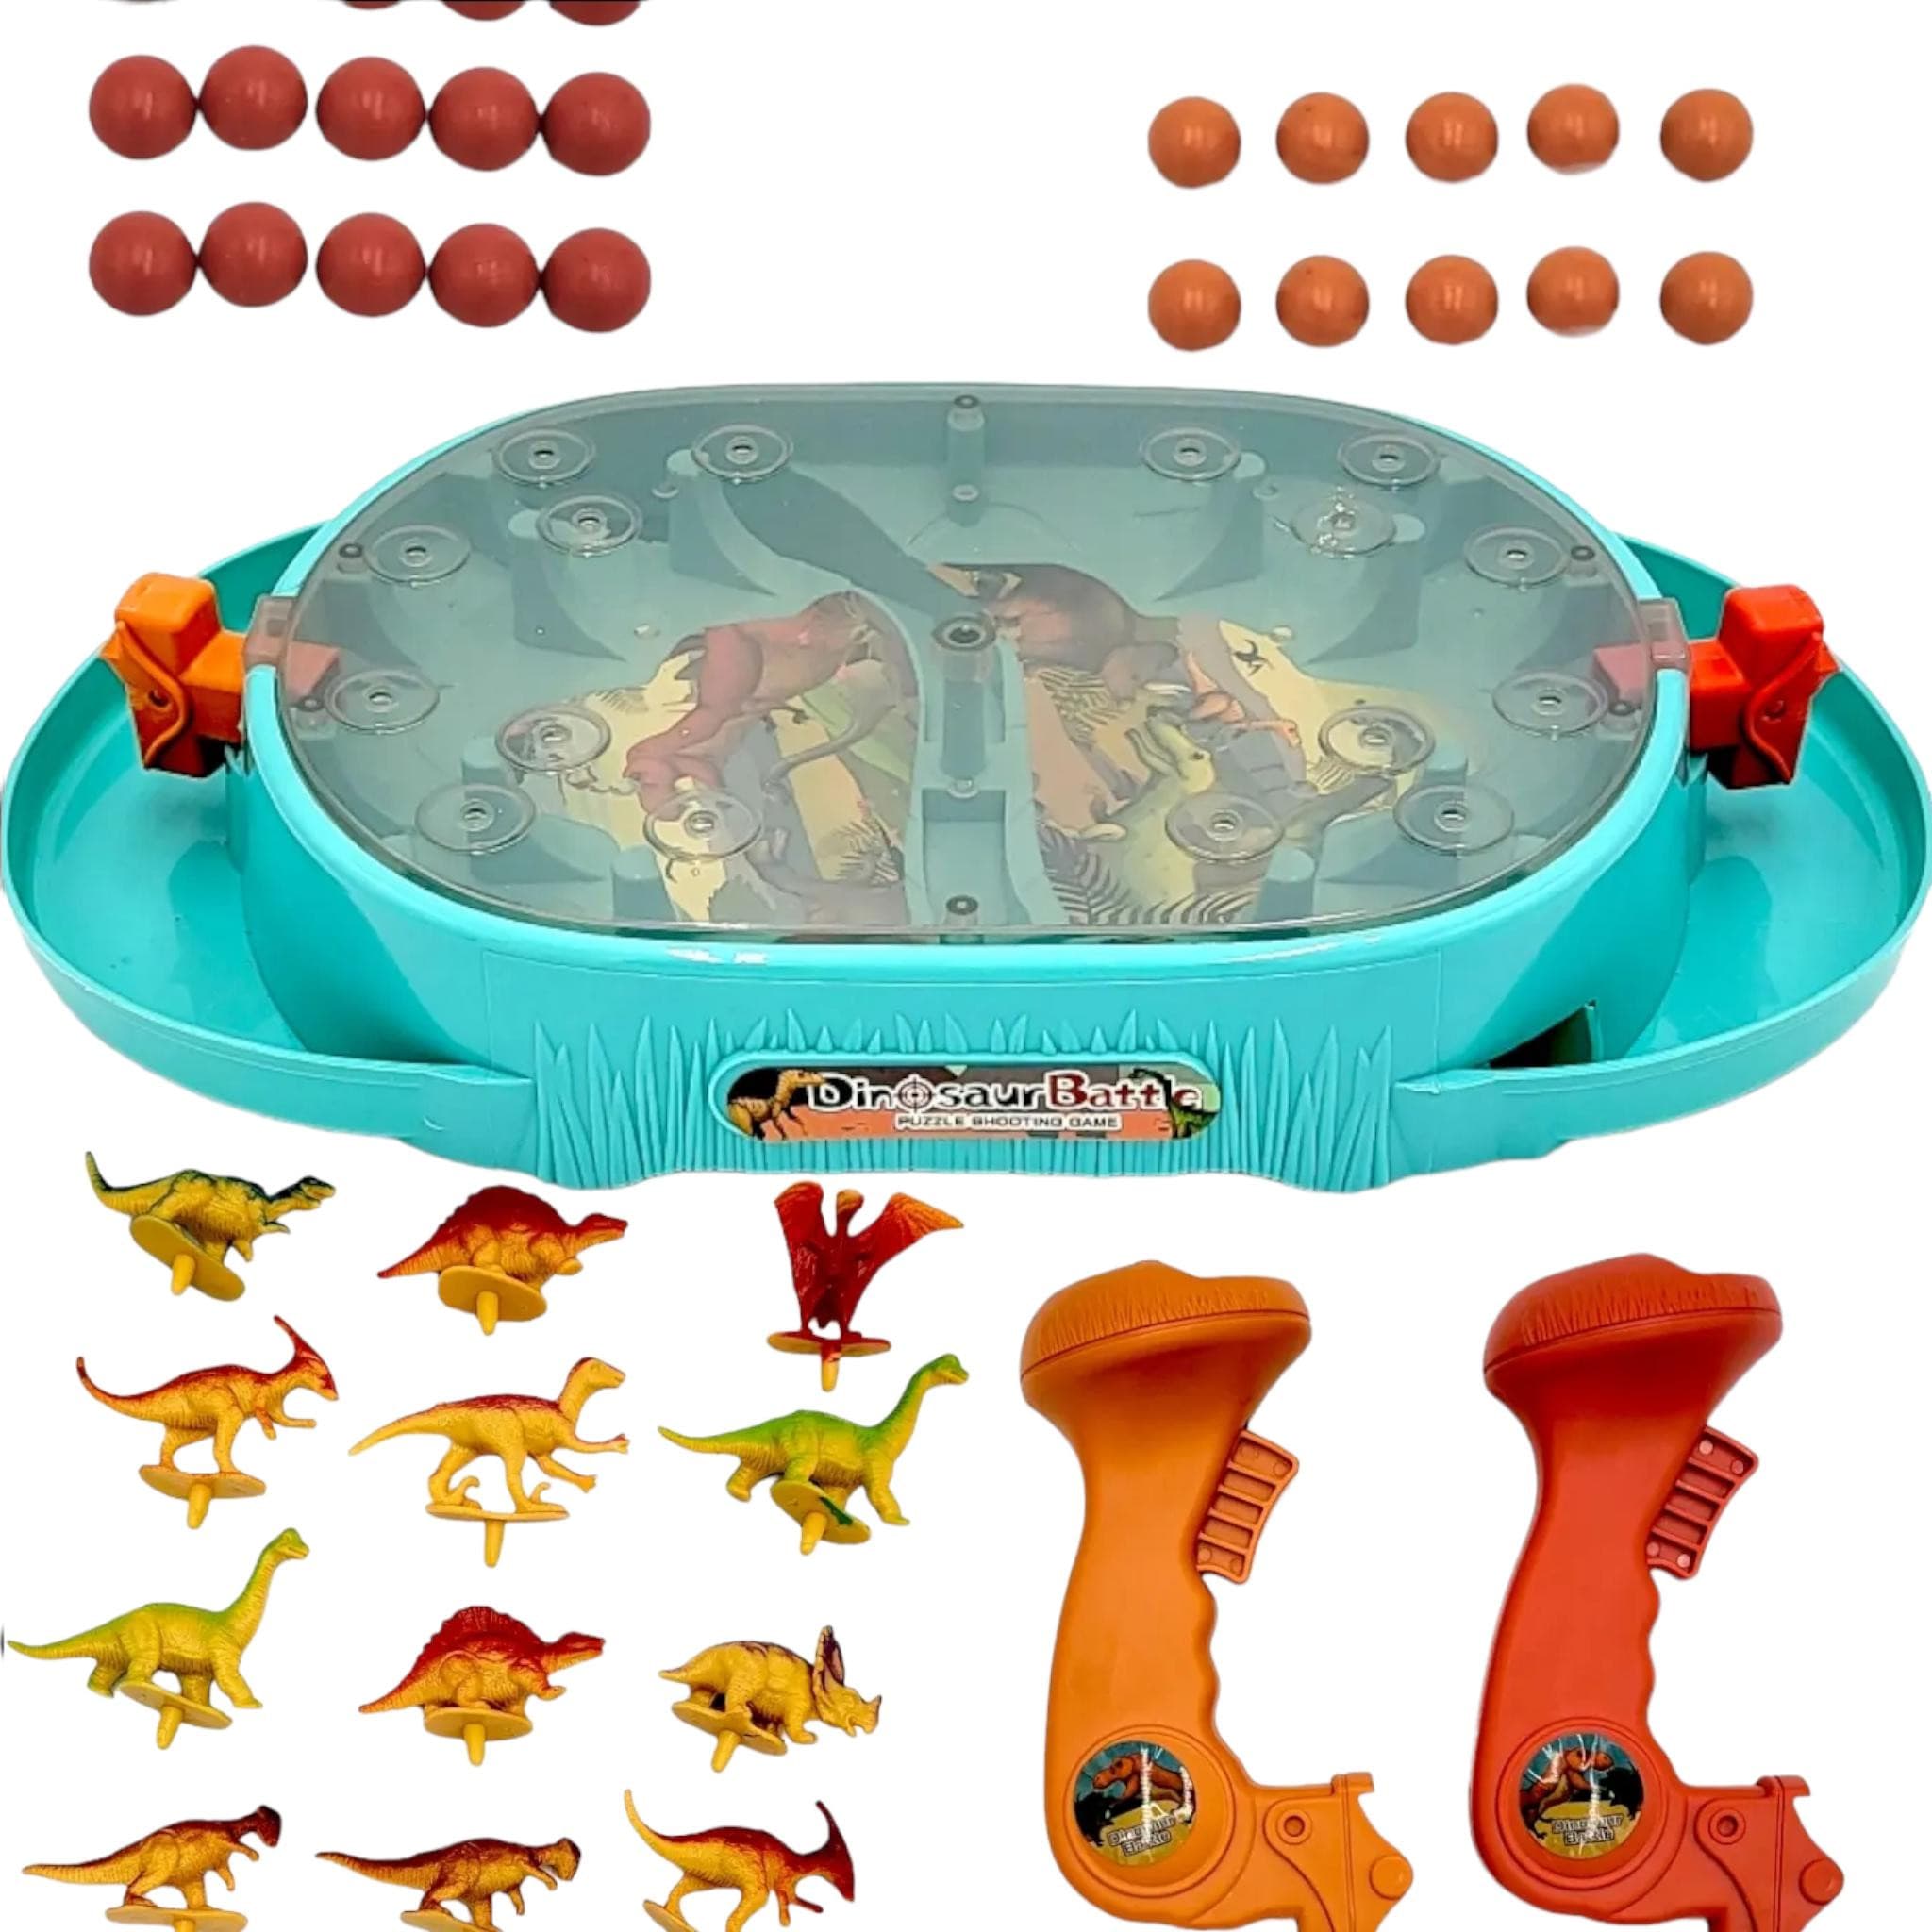  Pualsol Dino Shooting Toys.Dinosaur Game Battle Toy with Board  Games and Dragon Toys for Kids - Perfect Boys Party Games and Great Fun  Gifts for Childrens 4 5 6 7 8